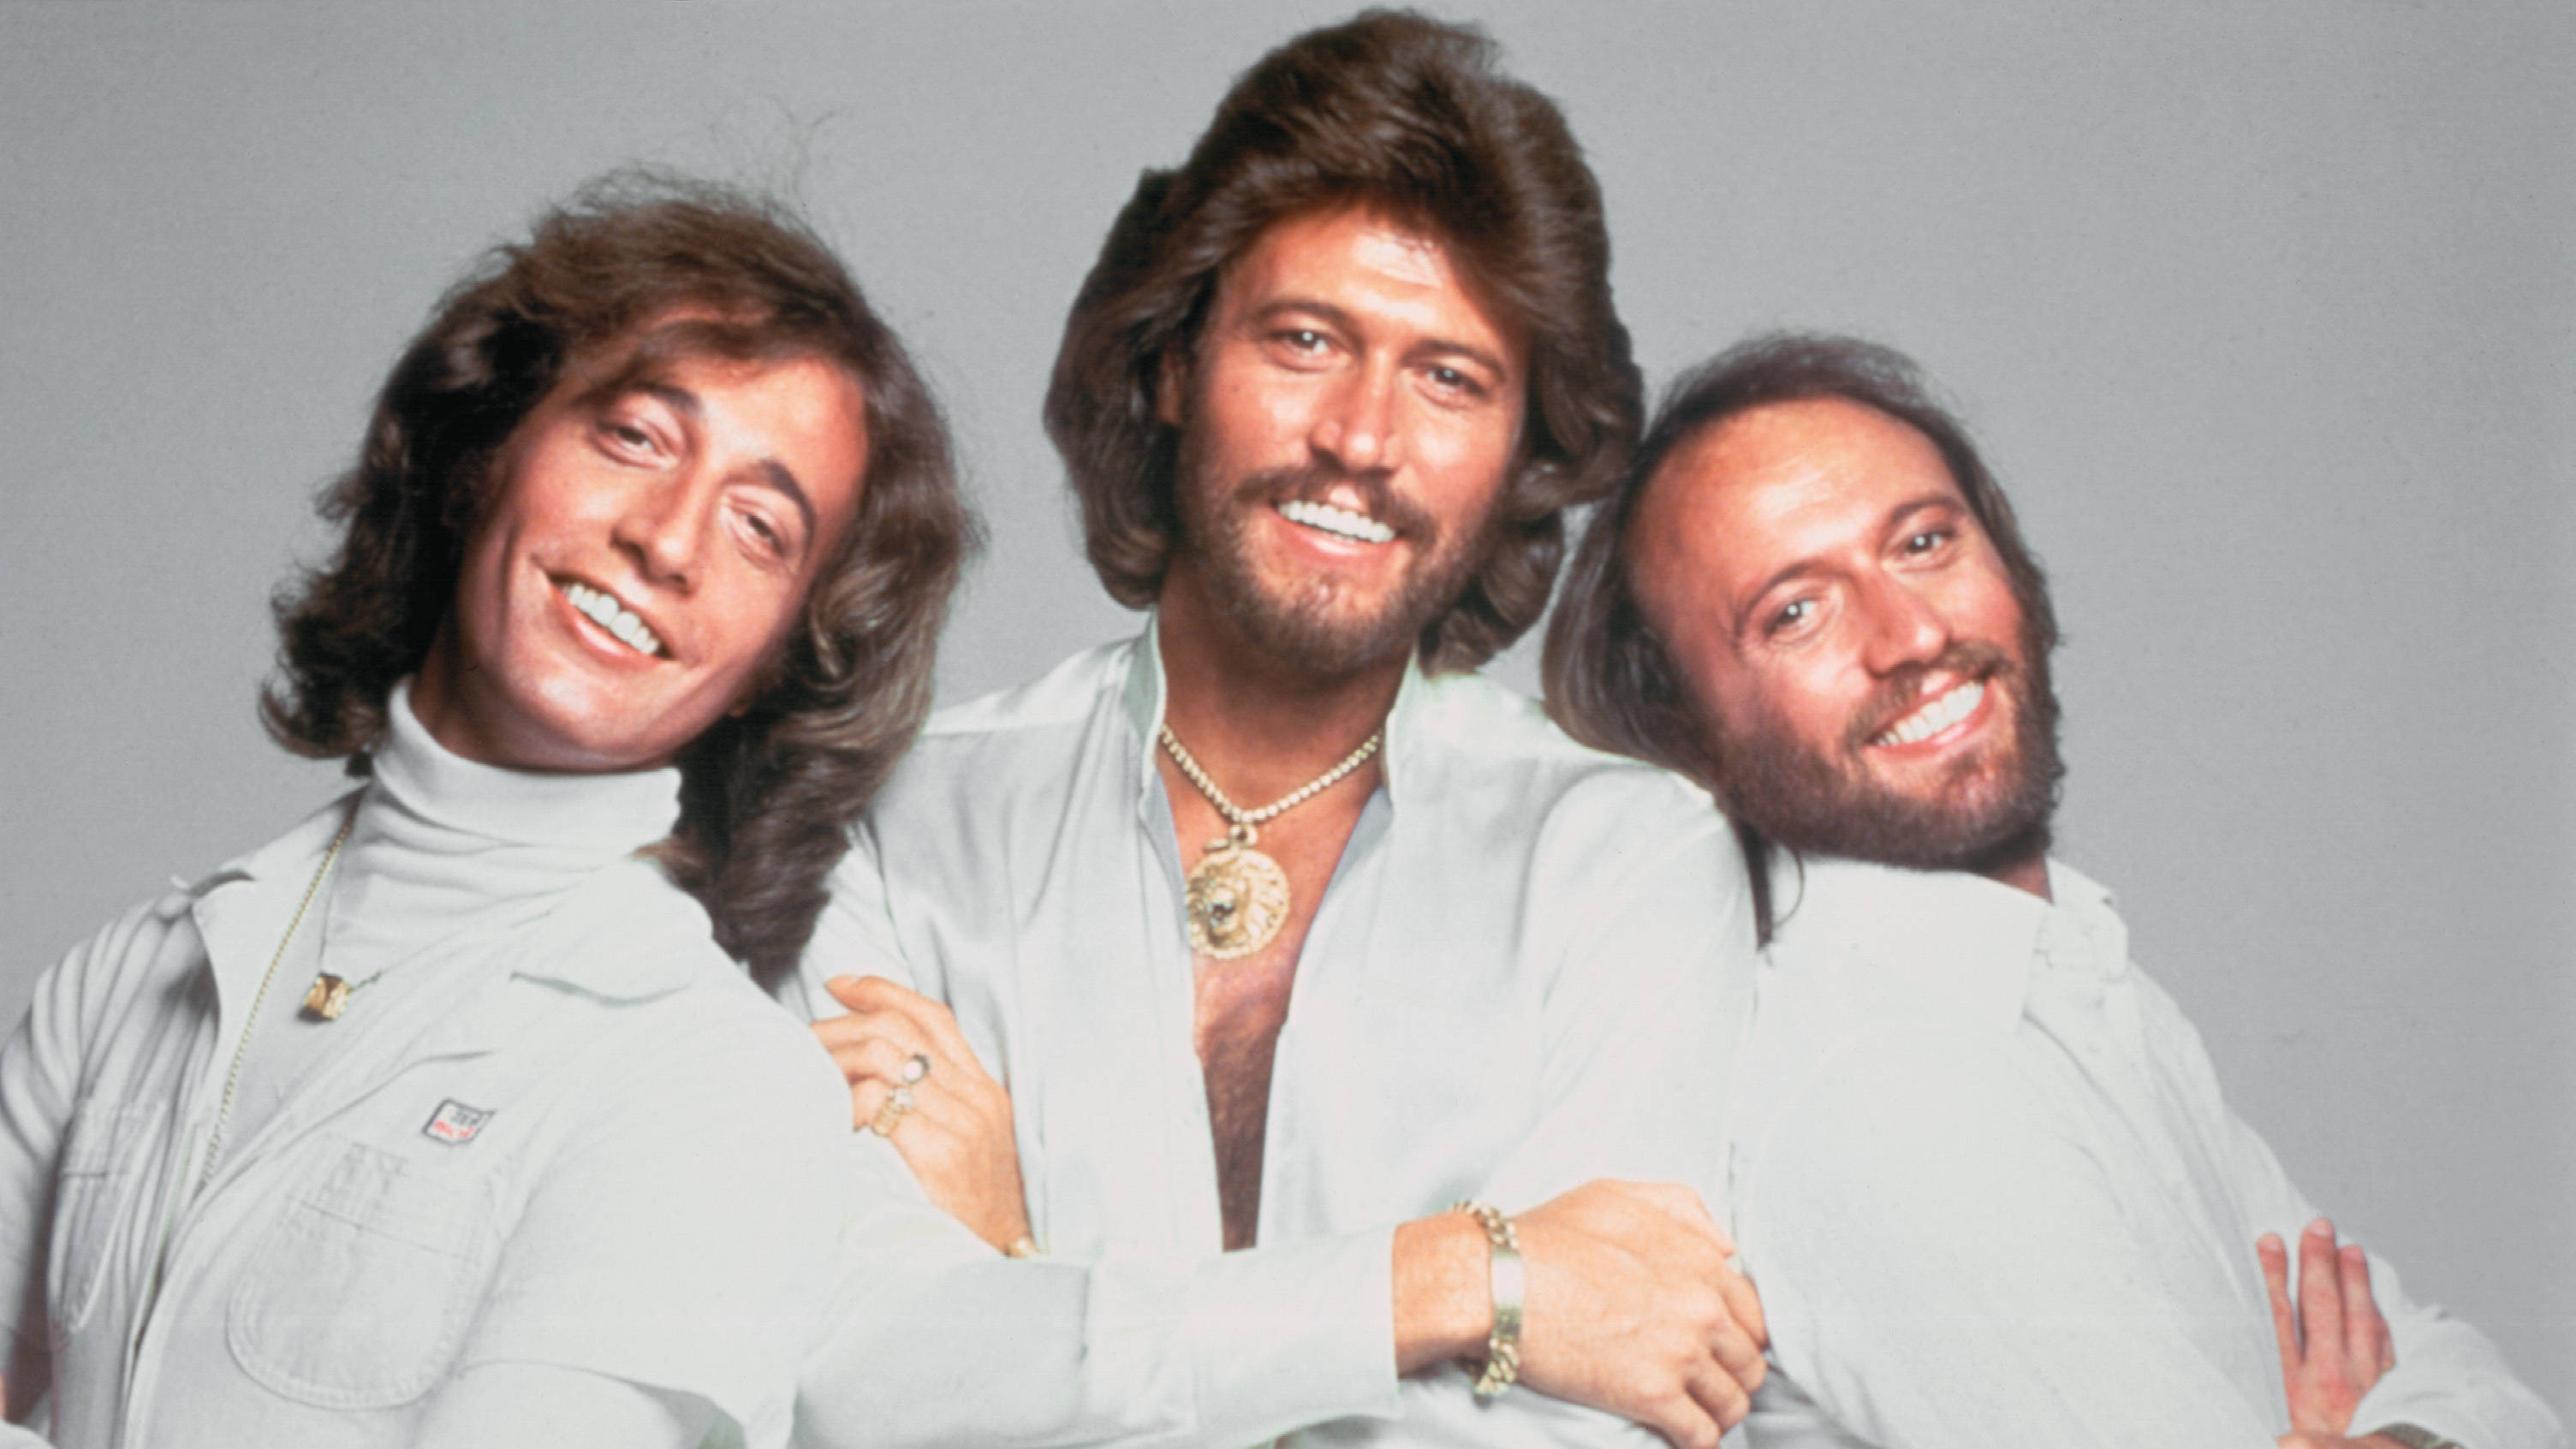 Bee Gees Gibb Brothers Biggest Songs Their Name And More Facts Revealed Gold